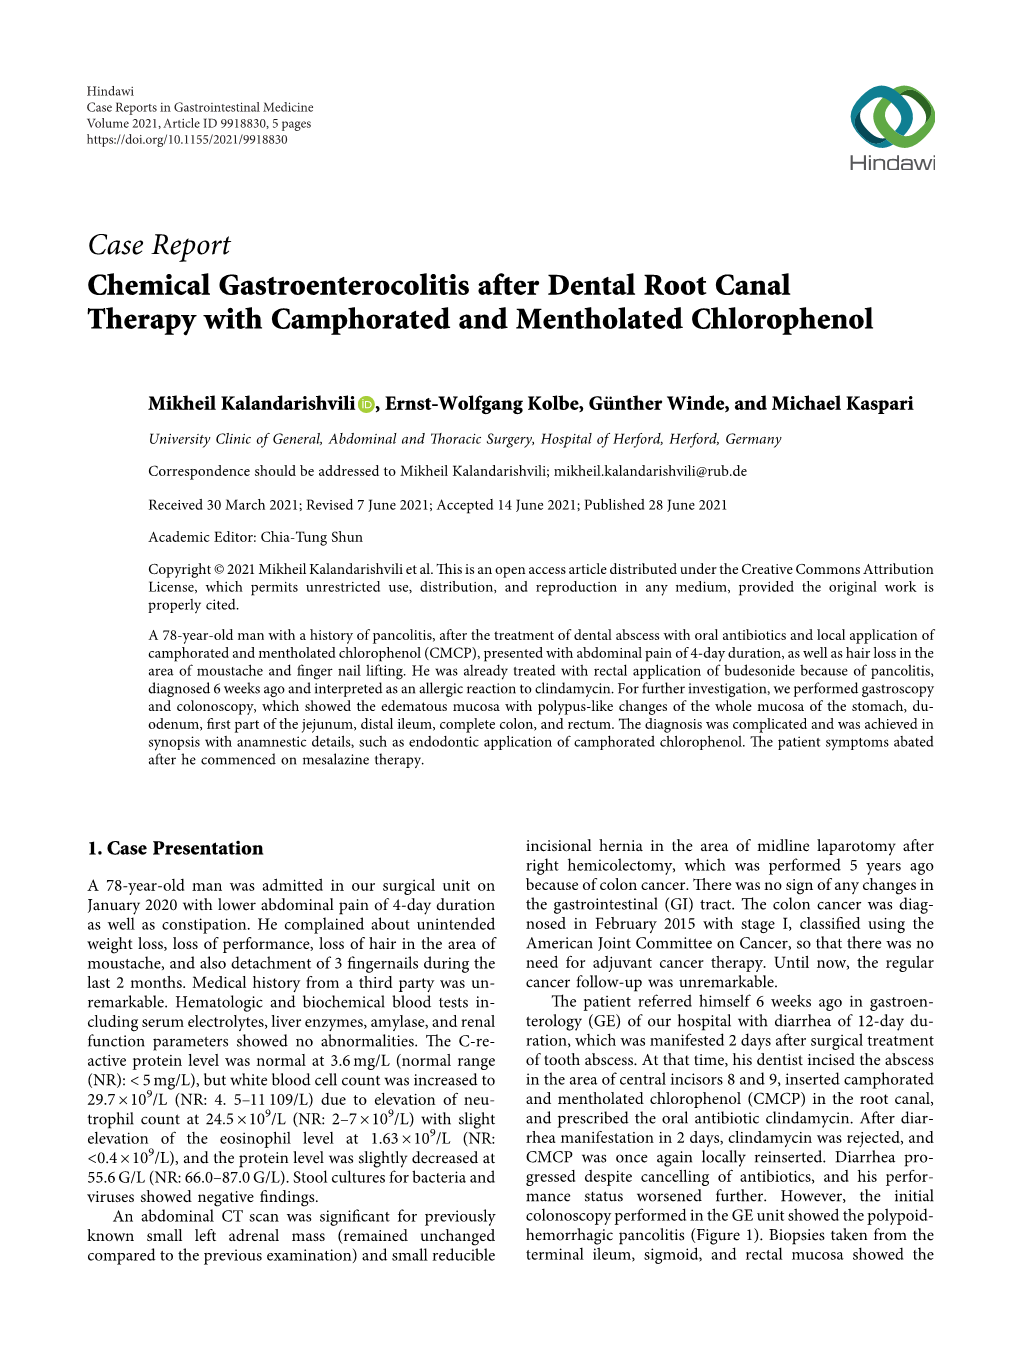 Chemical Gastroenterocolitis After Dental Root Canal Therapy with Camphorated and Mentholated Chlorophenol